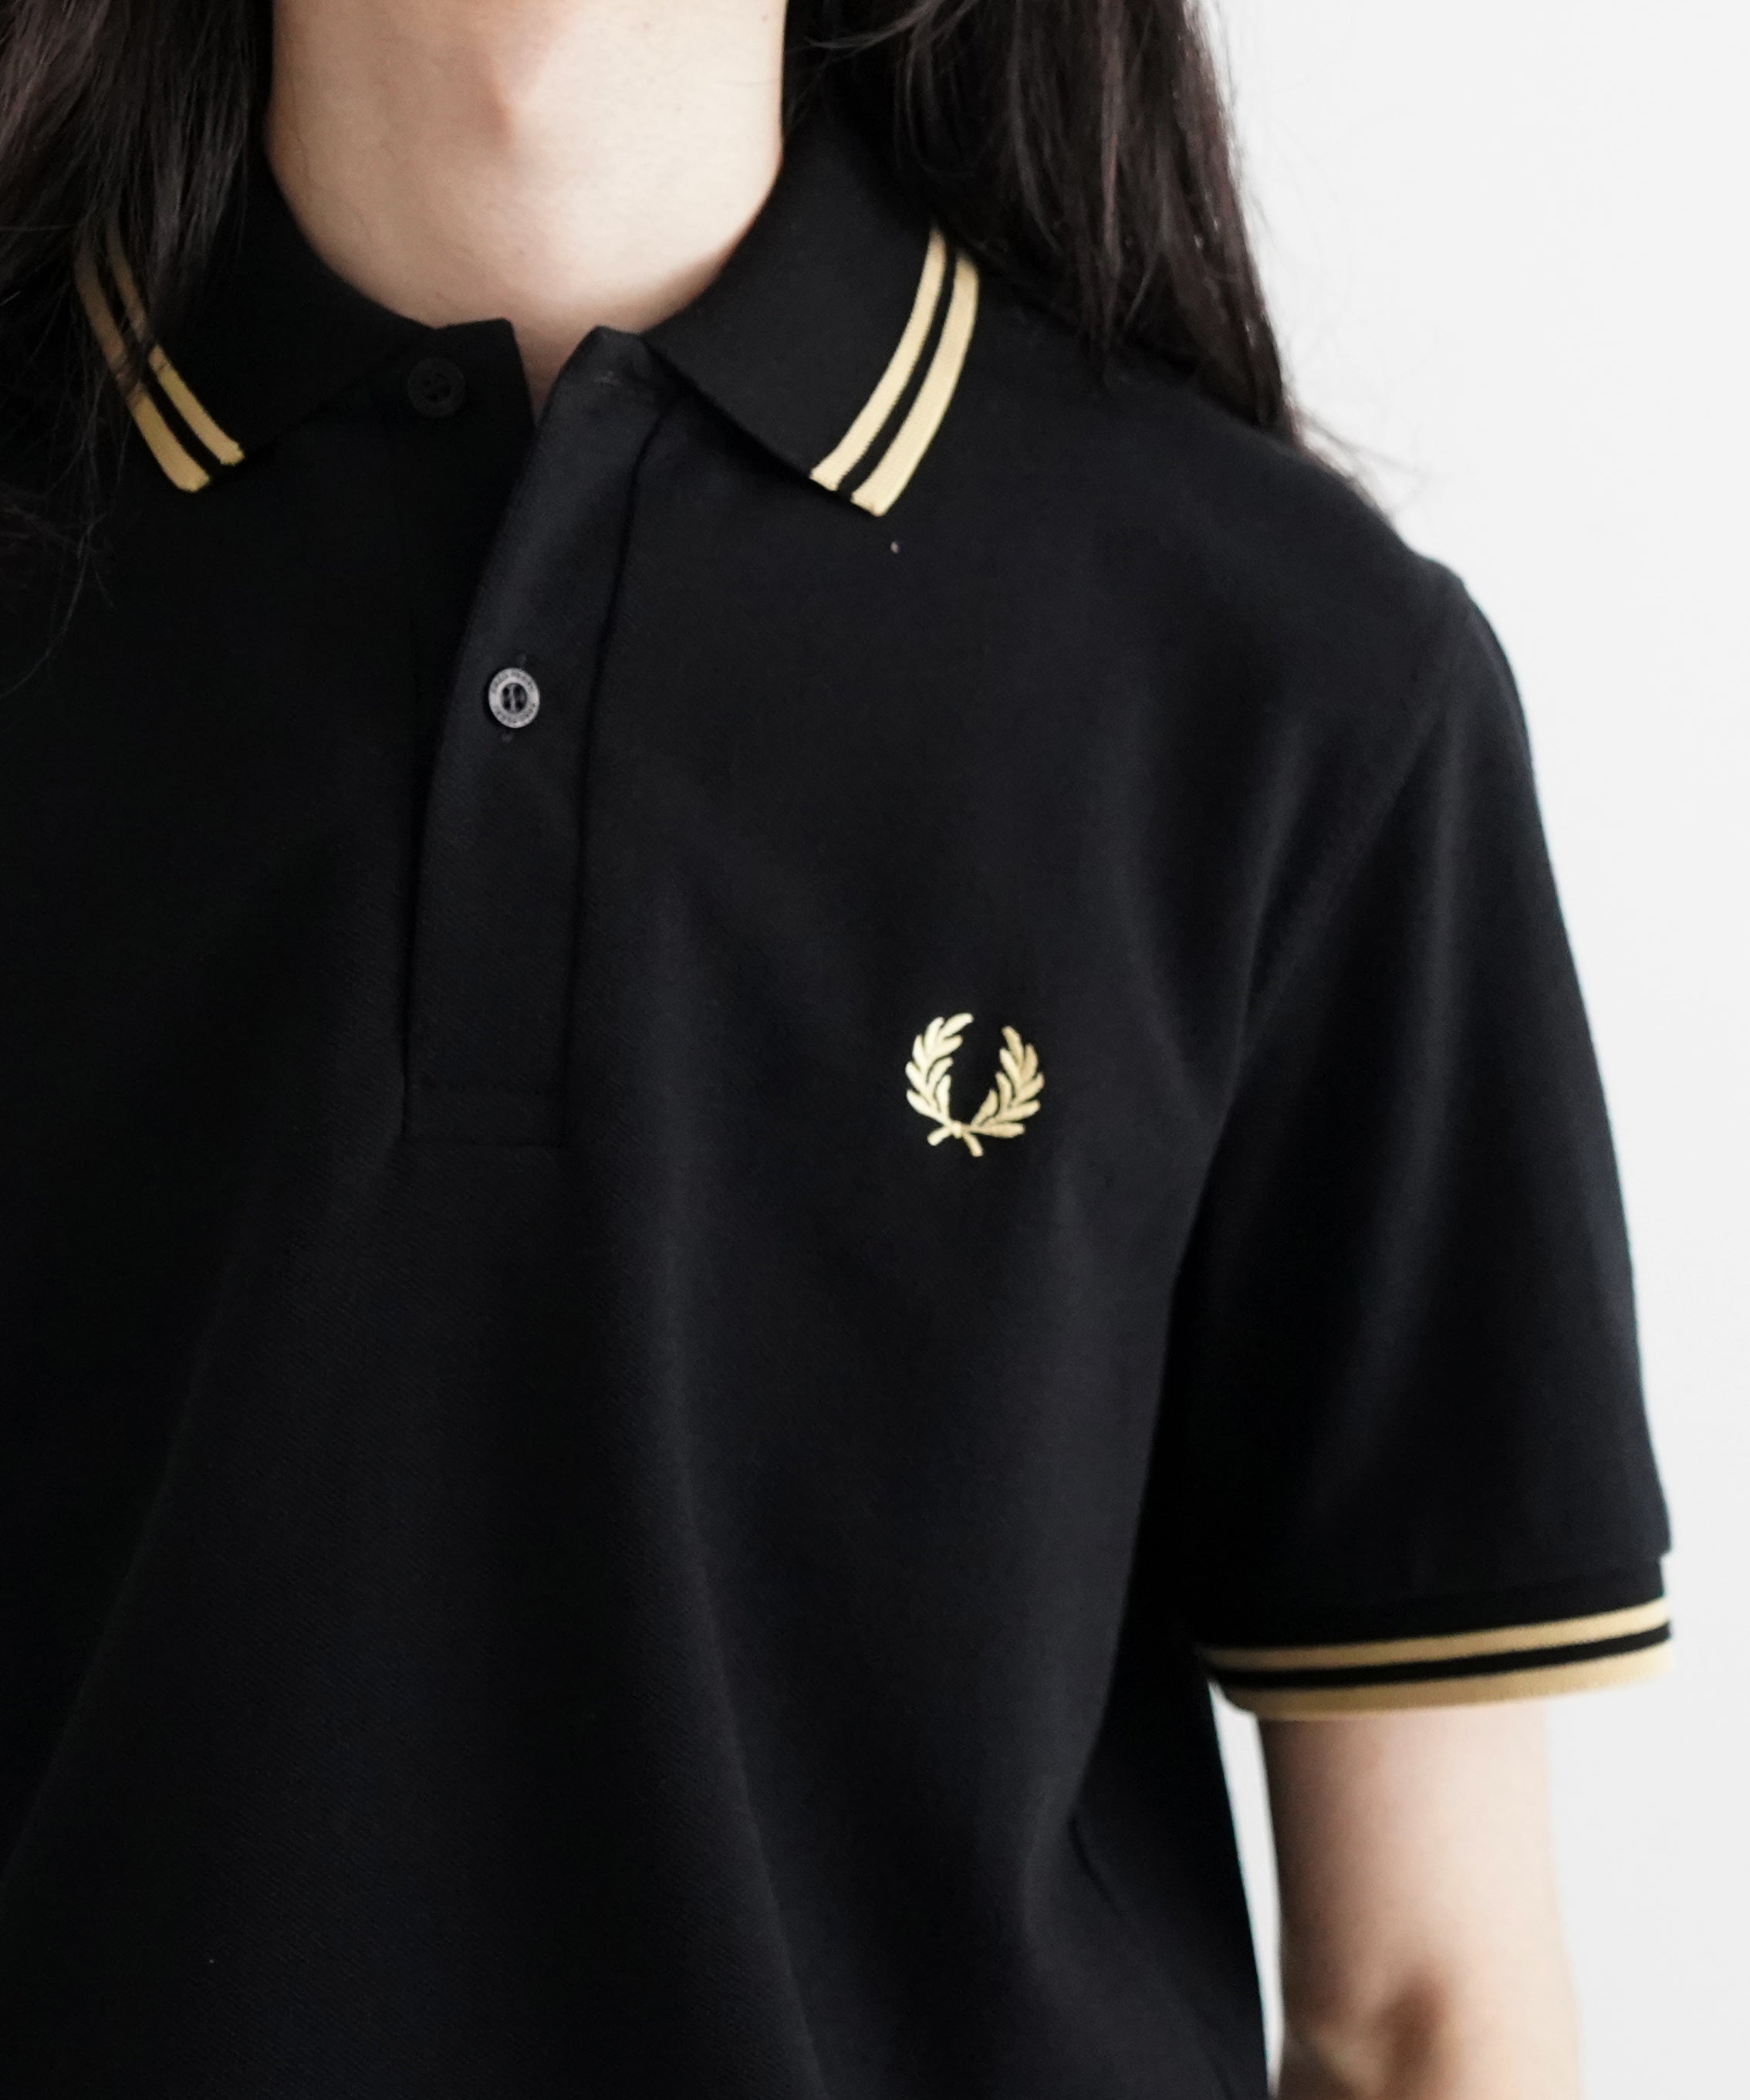 FRED PERRY TWIN TIPPED FRED PERRY SHIRT "BLACK / CHAM"